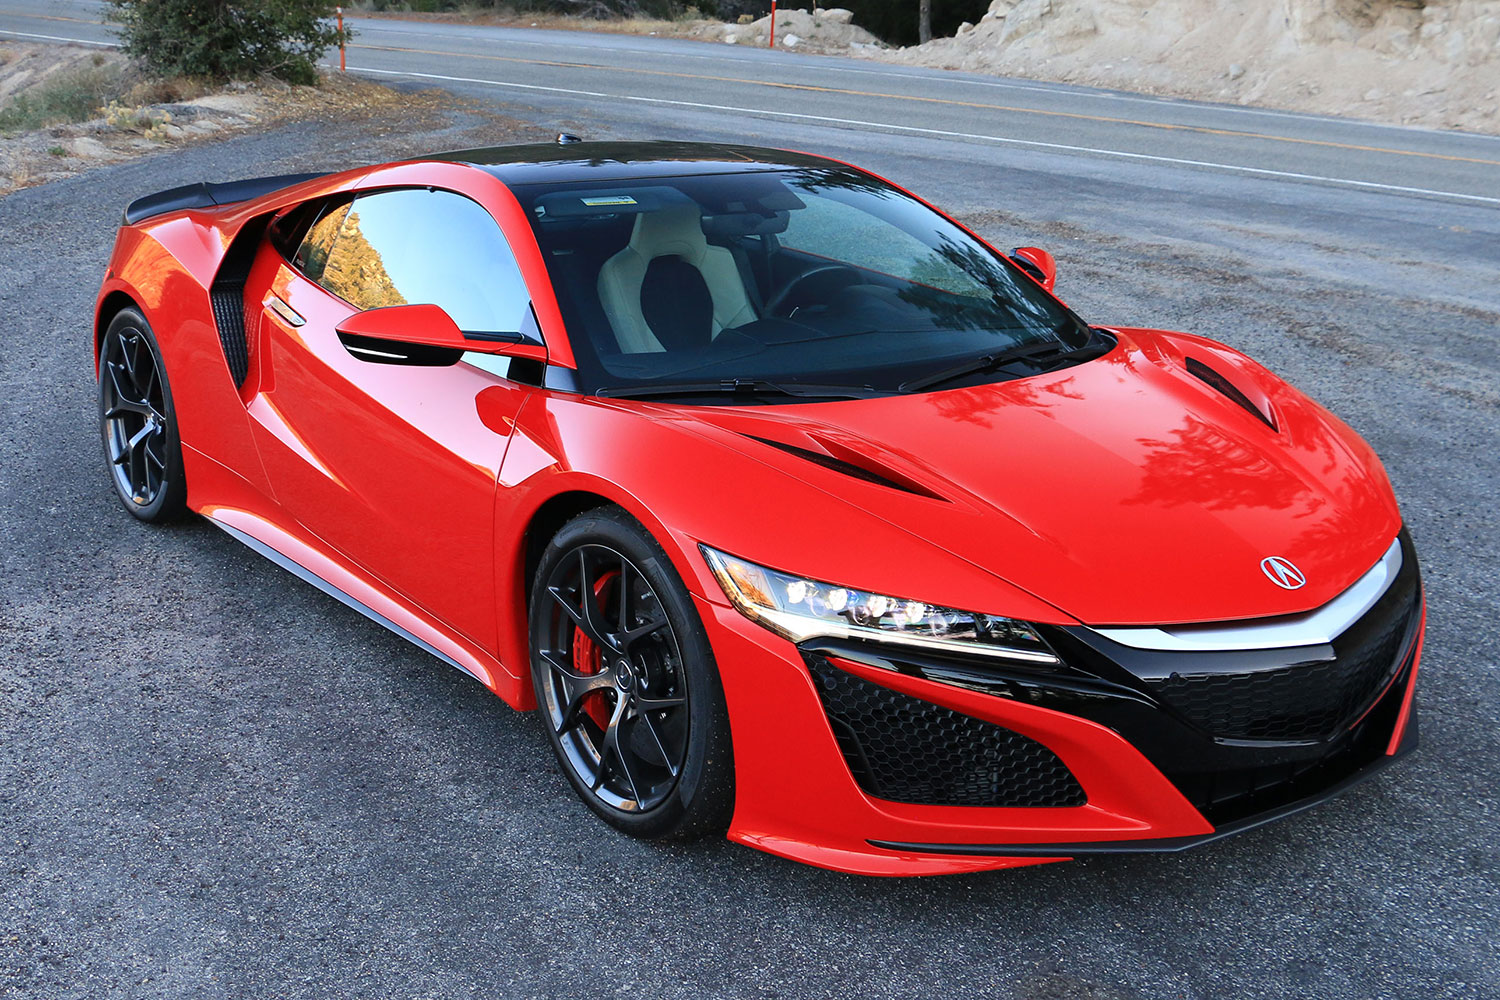 2017 Acura NSX Review | Digital Trends